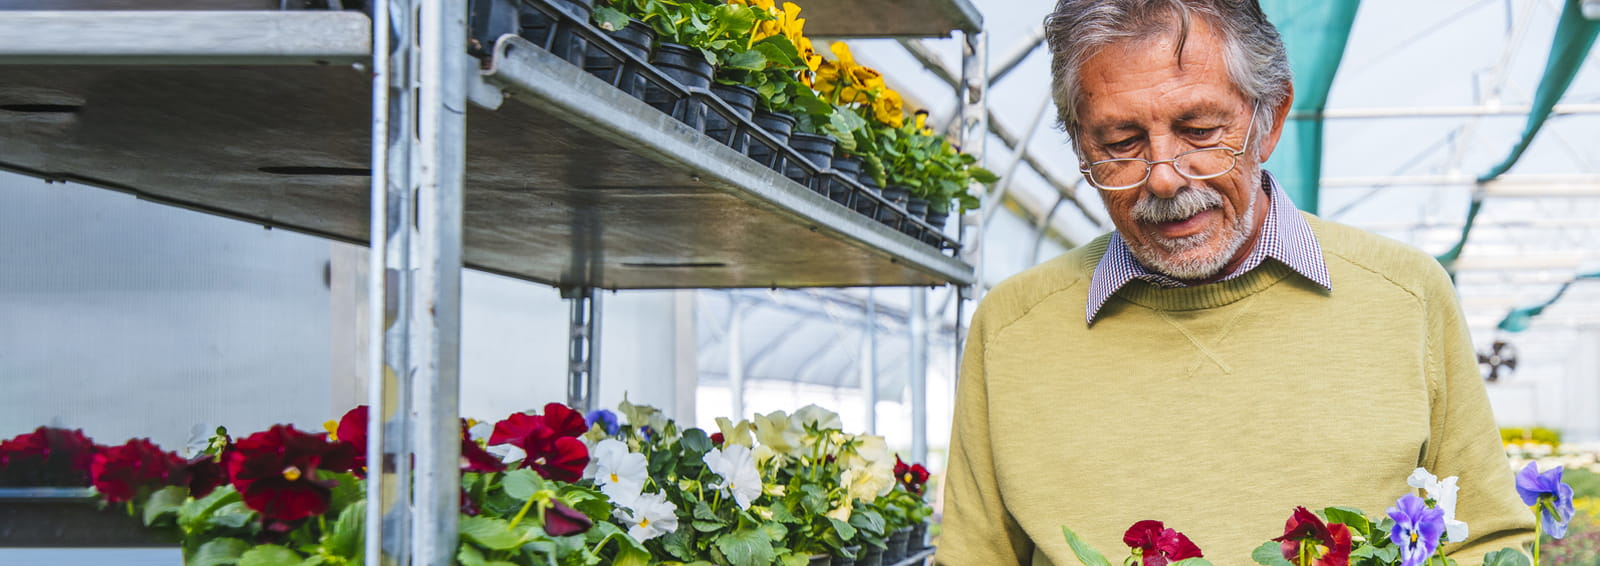 older man in greenhouse with flowers